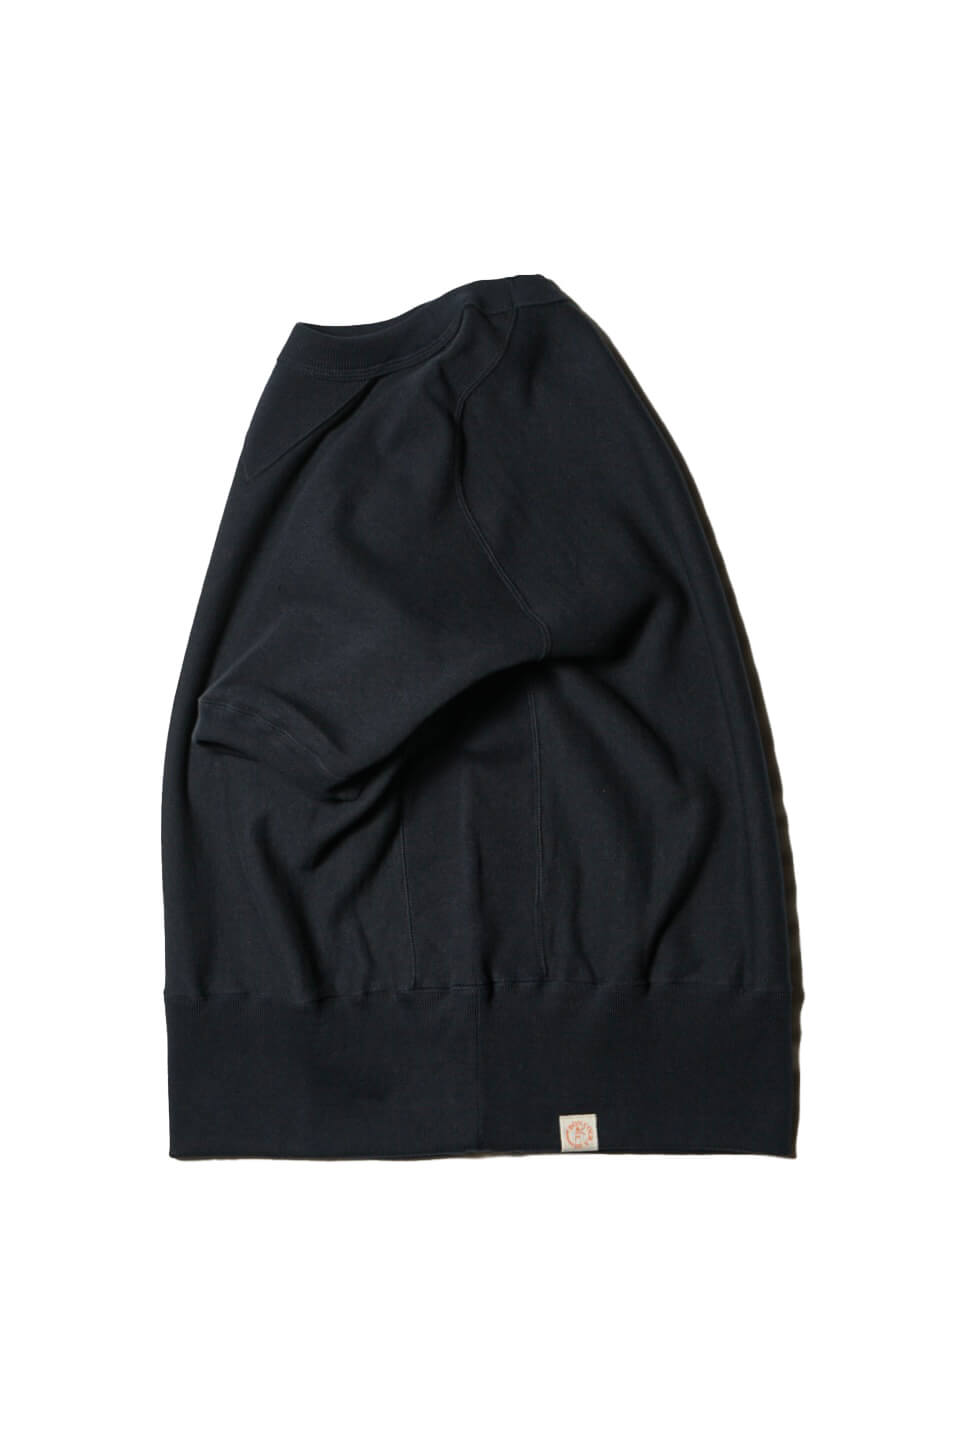 S/S SWEAT SHIRT - ARCH EXCLUSIVE（NAVY）